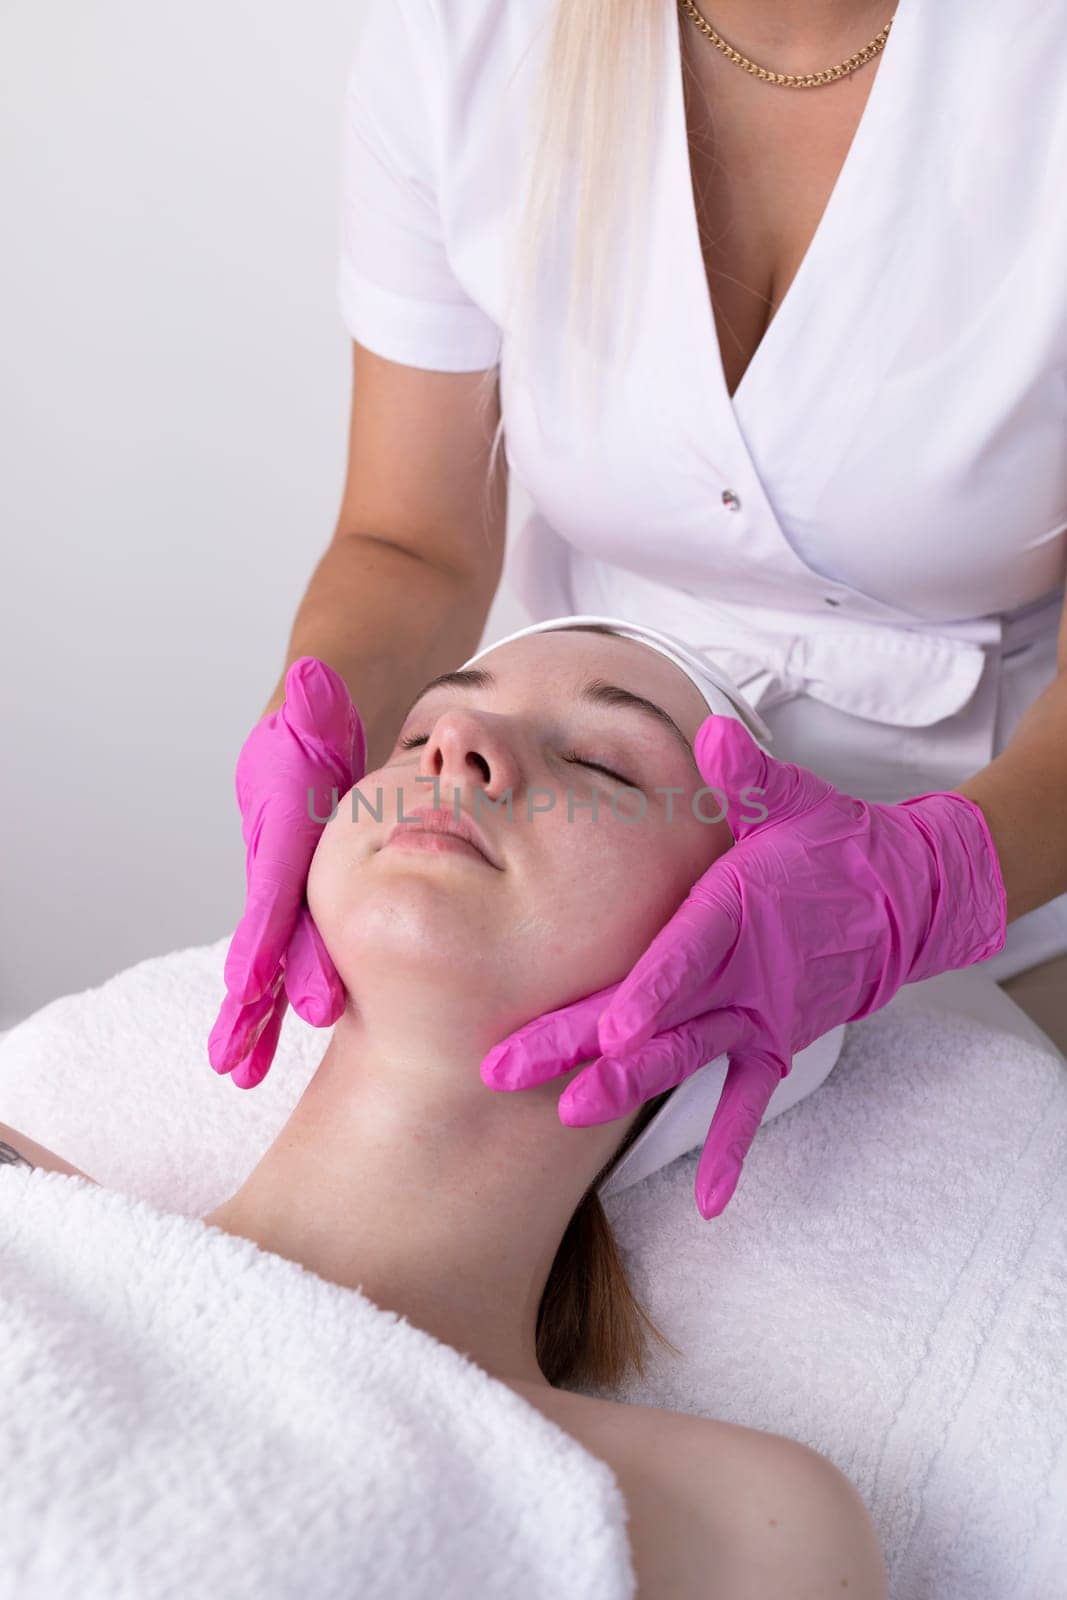 Female Patient Receives Spa Facial Massage Treatment In Spa Salon. Relax And Stress Relief. Professional Skin Care Therapist Takes Care Of Woman. Top View. Vertical Plane, by netatsi